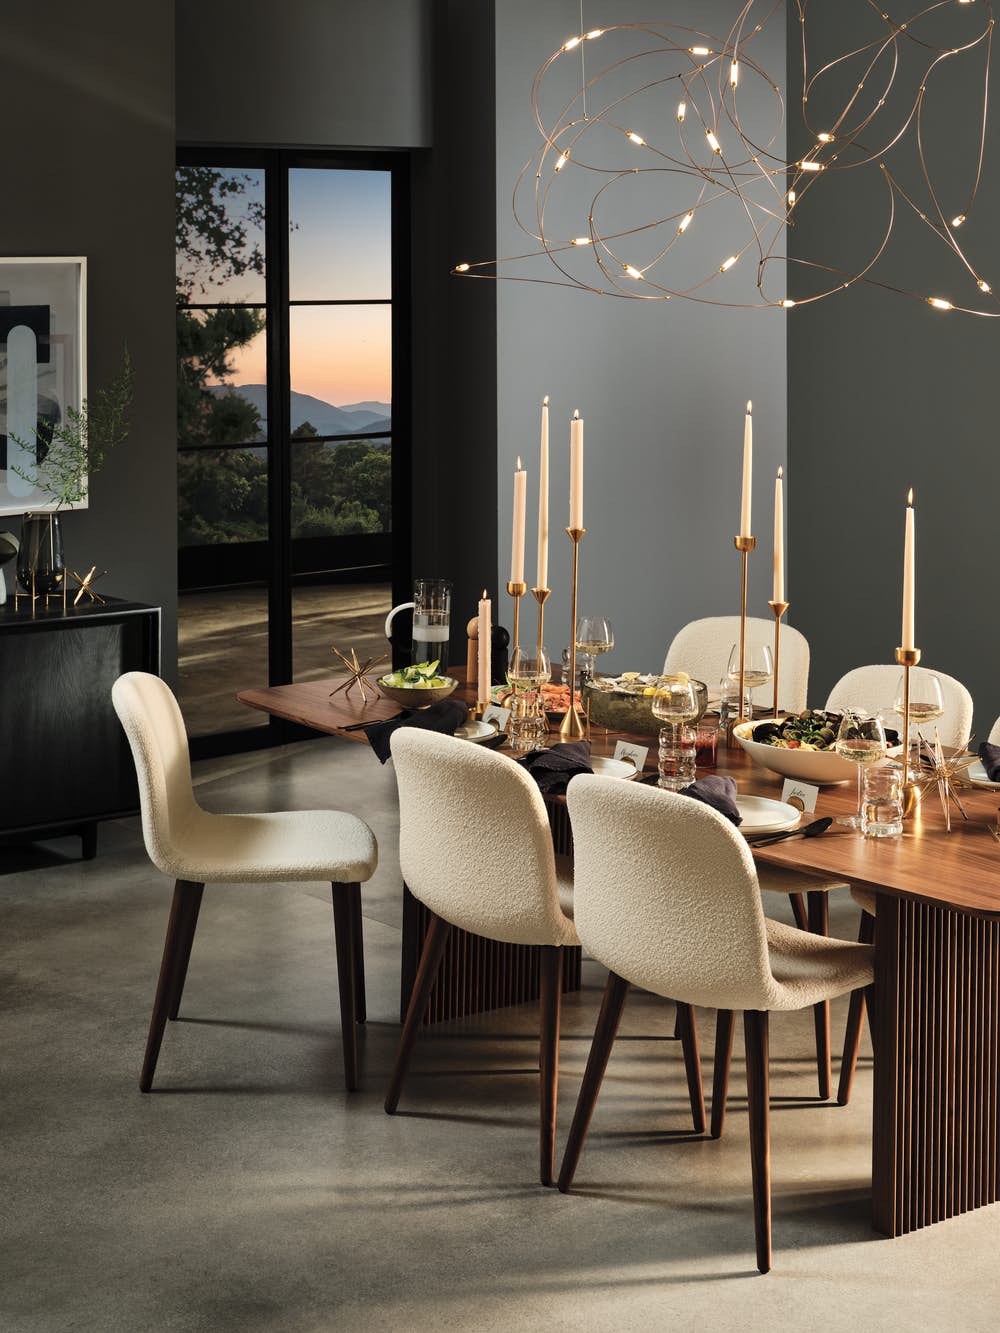 Ten Table dining room with Bacco Chairs